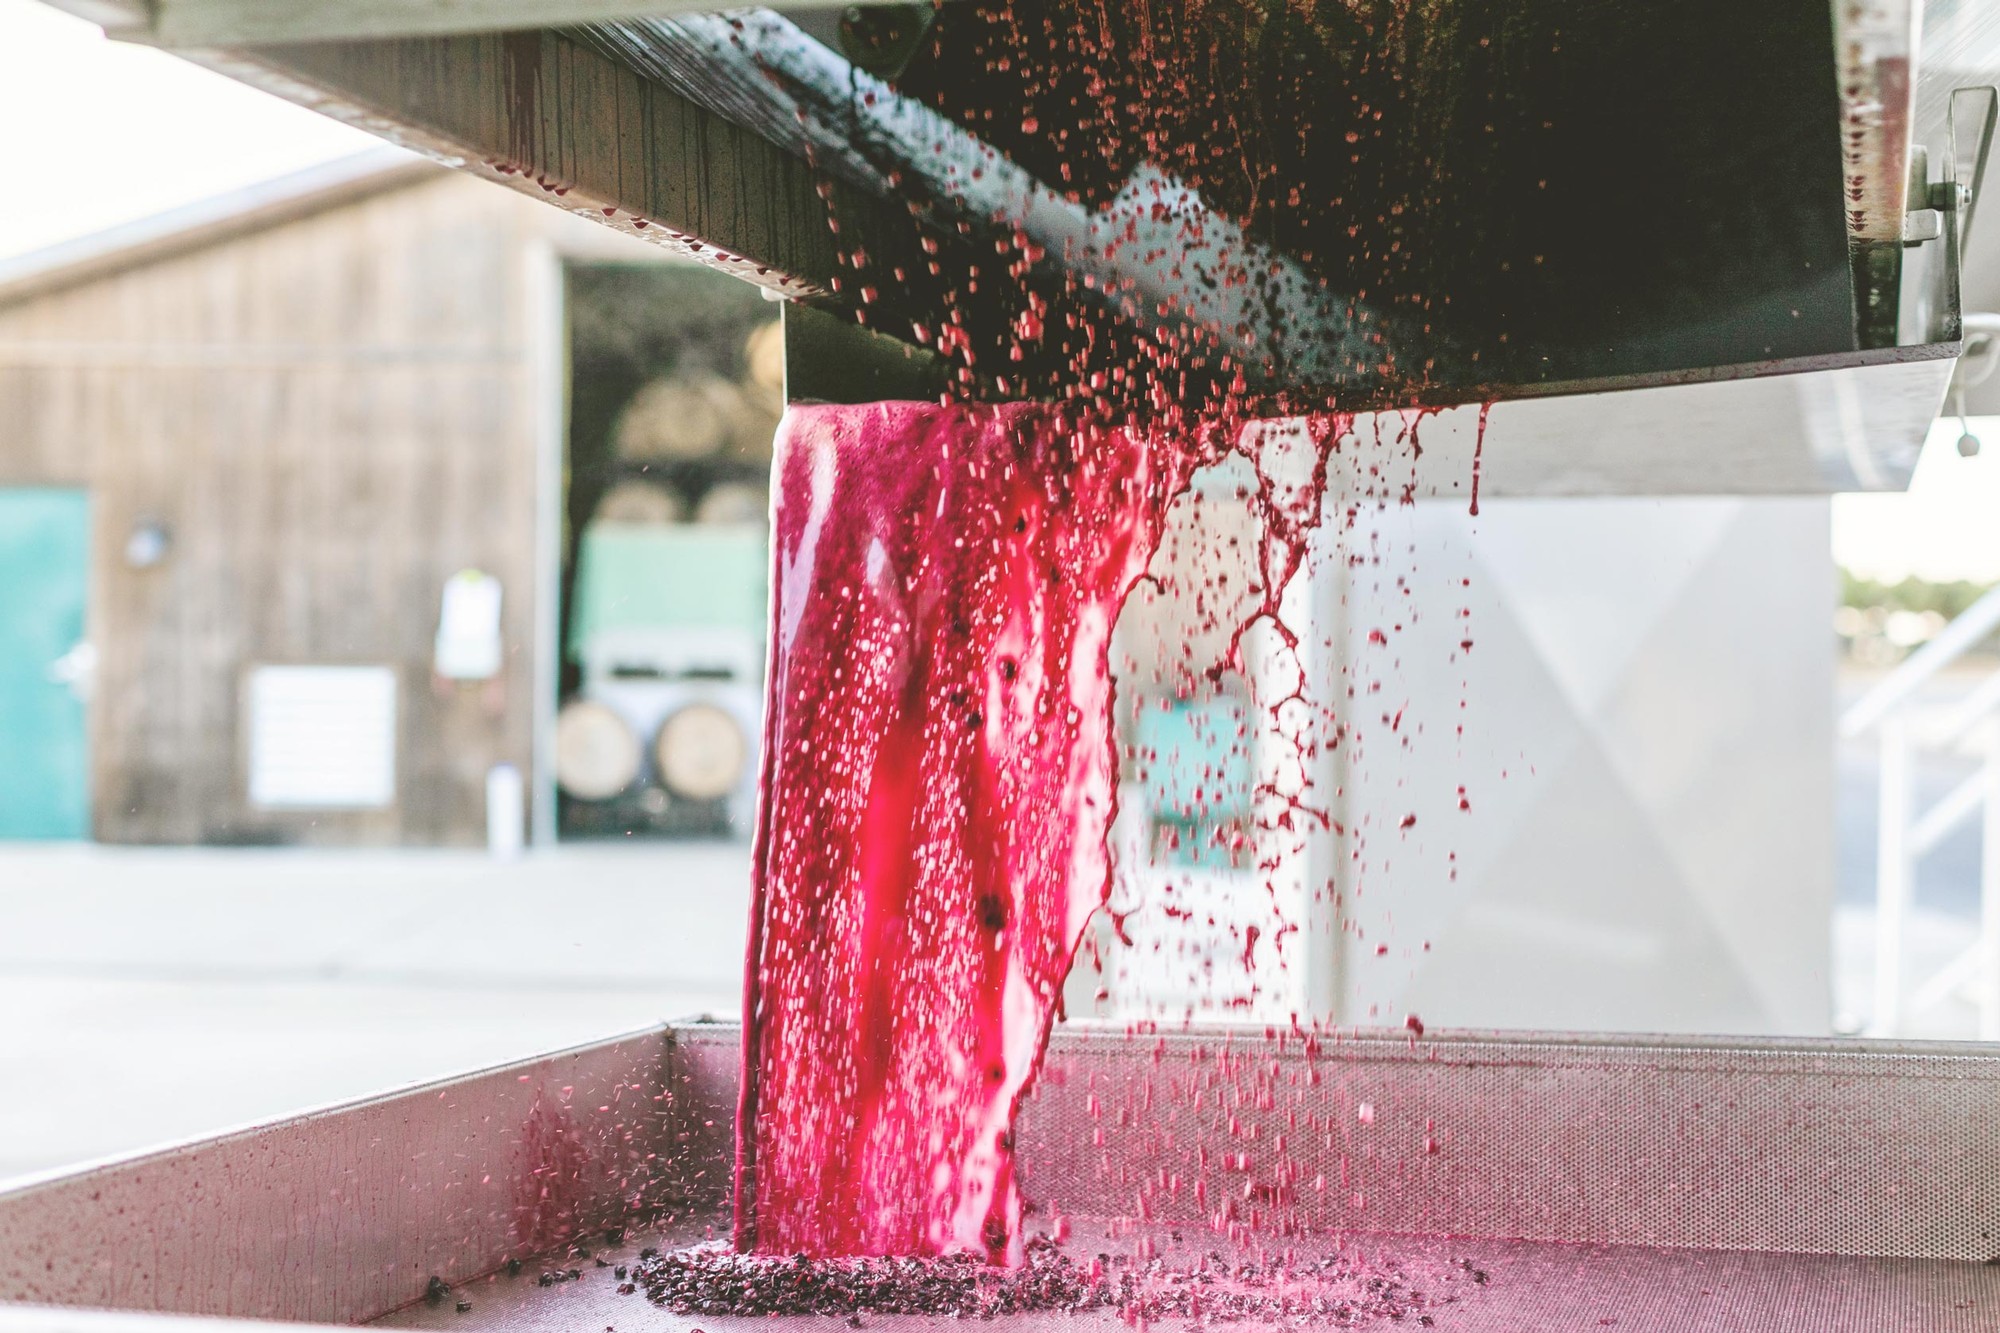 Grape juice flowing freely from a grape press during harvest.